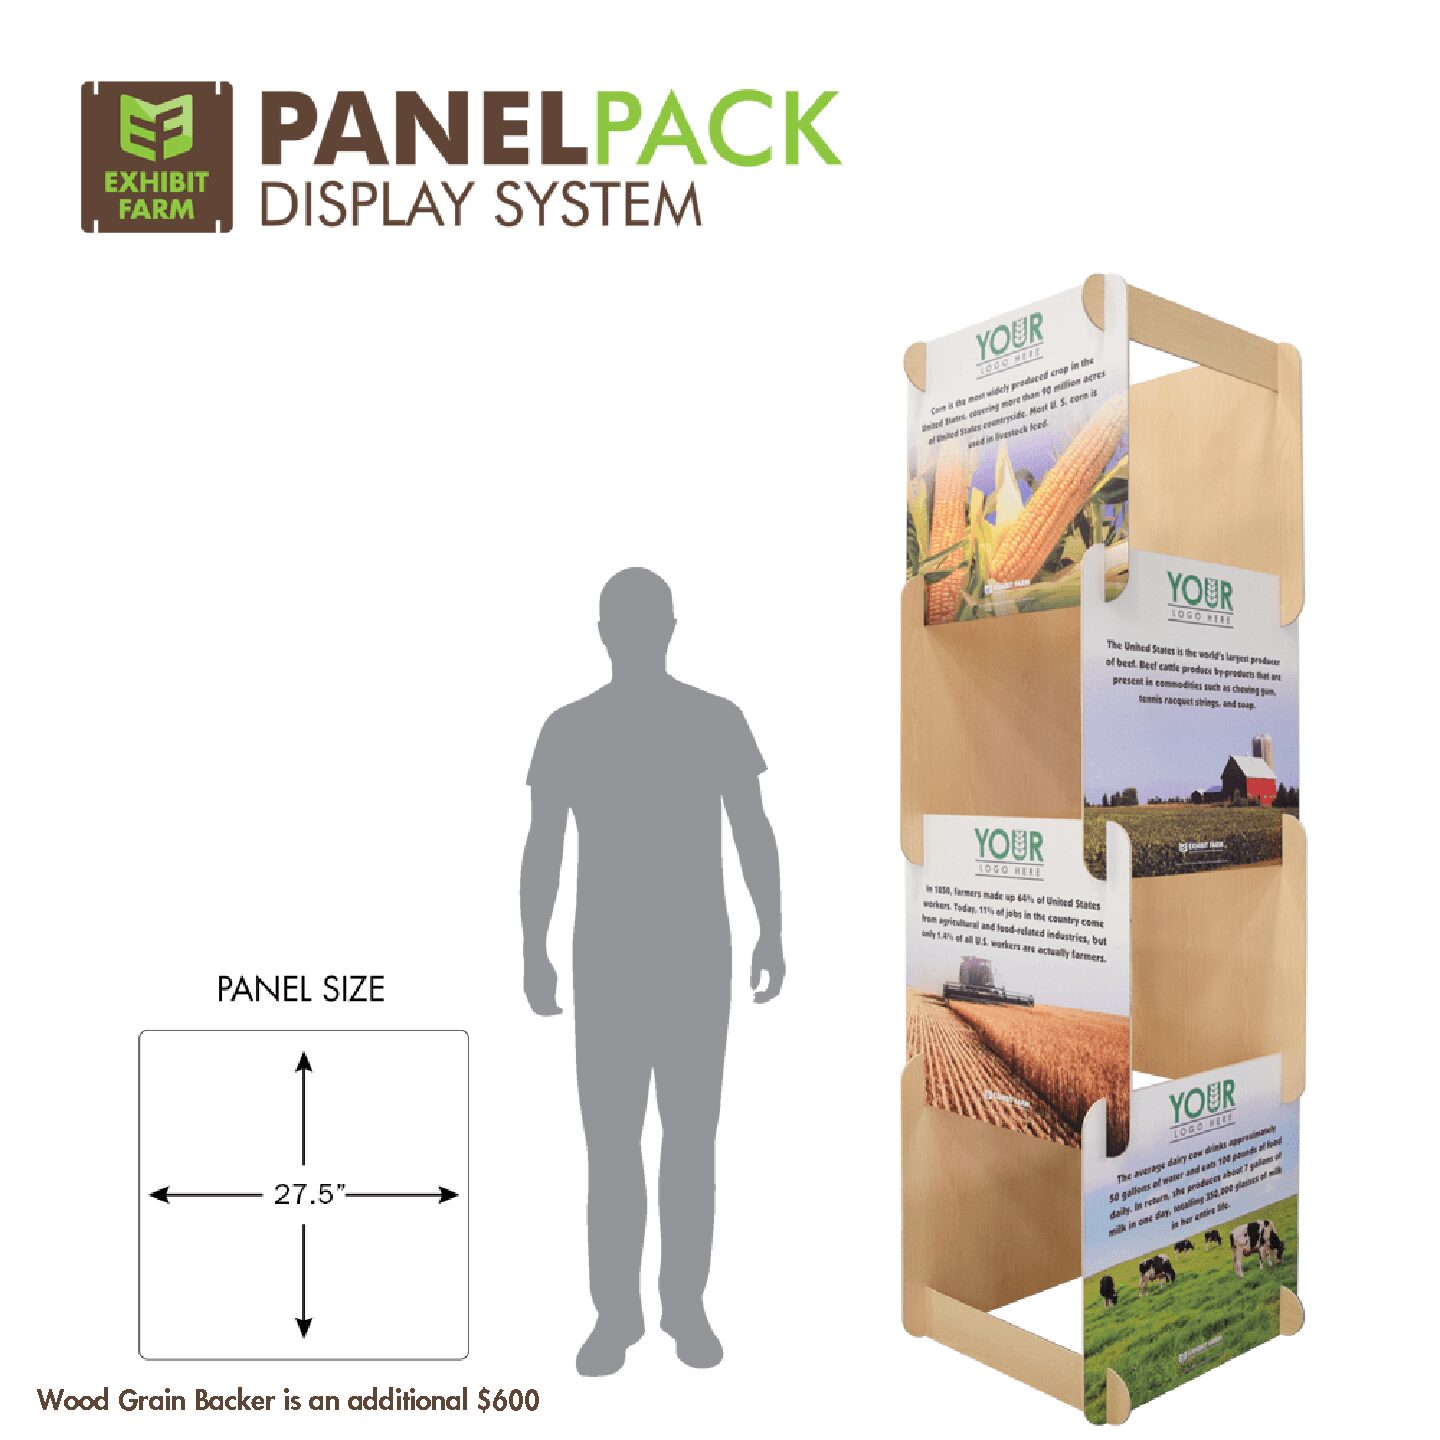 8’ Panel Pack Wood Grain Backer is an additional $600